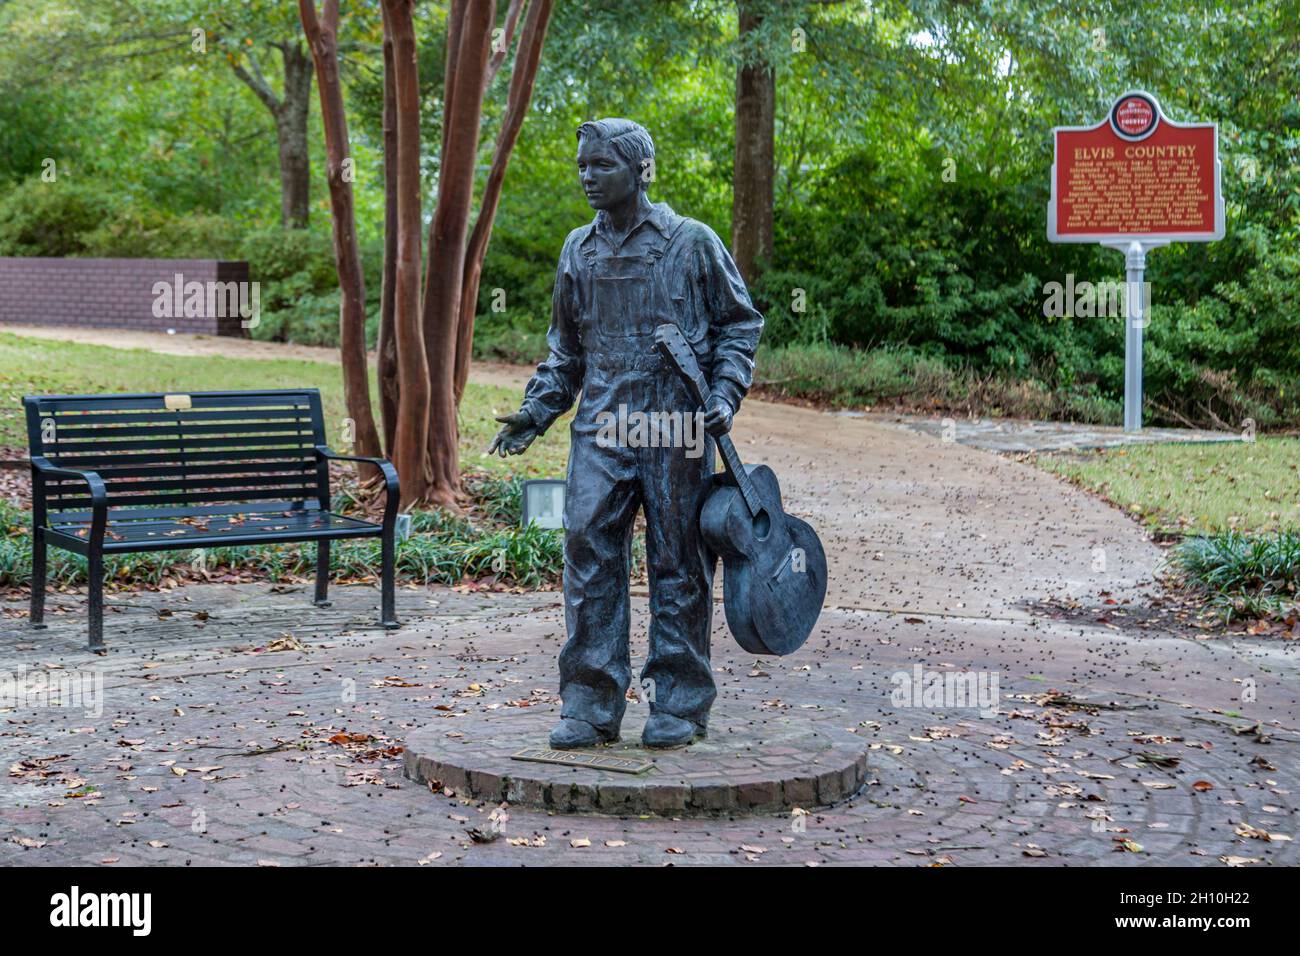 'Elvis at 13' sculpture at Elvis Presley Birthplace and Museum in Tupelo, Mississippi Stock Photo